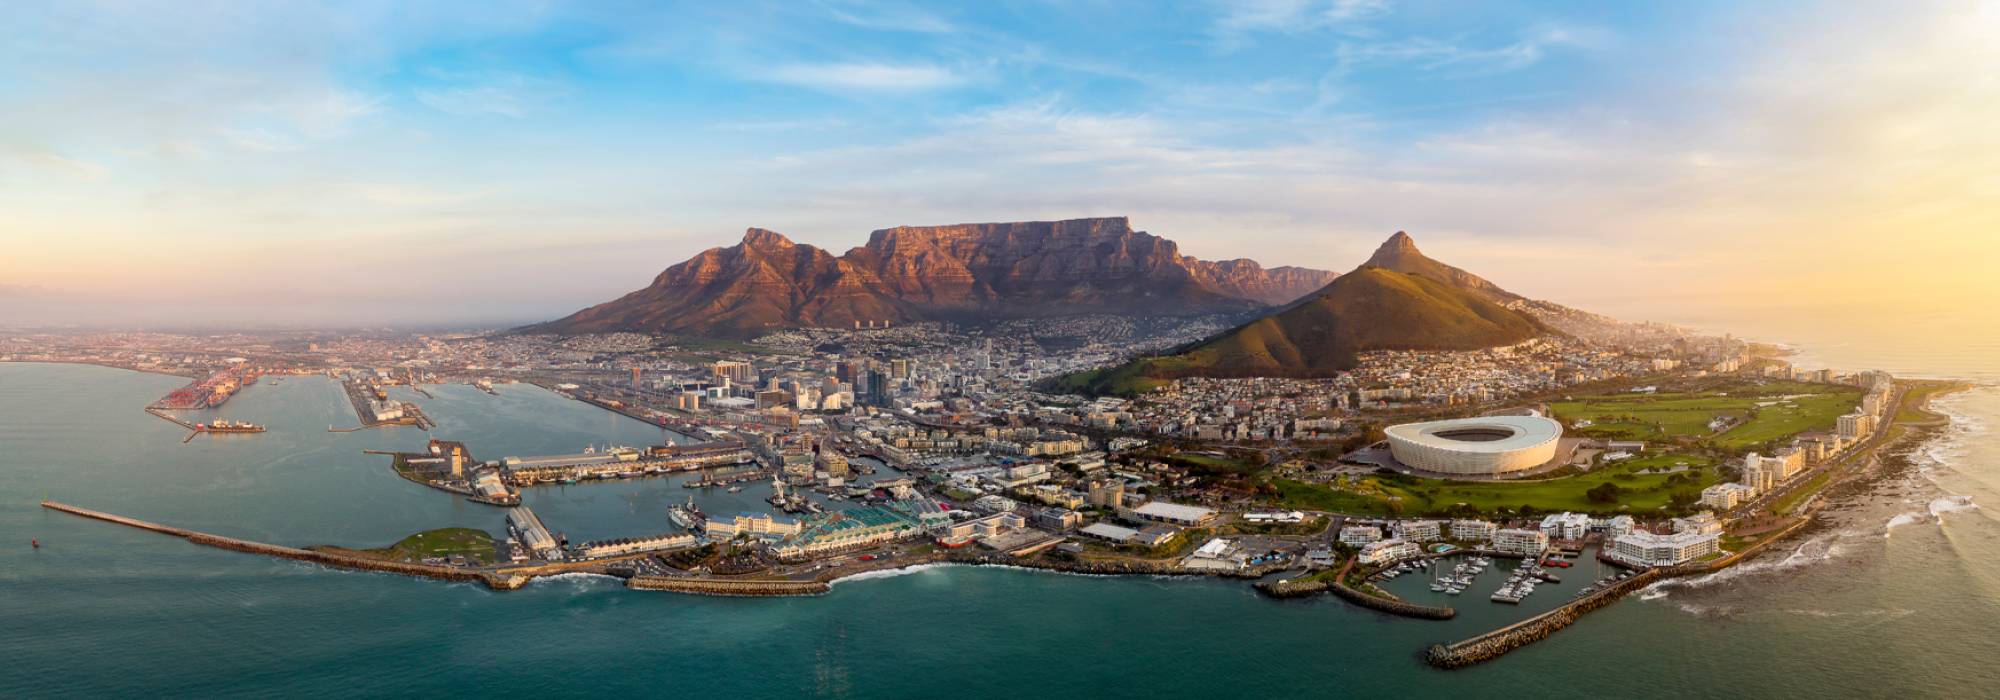 CAPE TOWN: A COASTAL HAVEN OF CULTURAL MARVELS AND NATURAL WONDERS